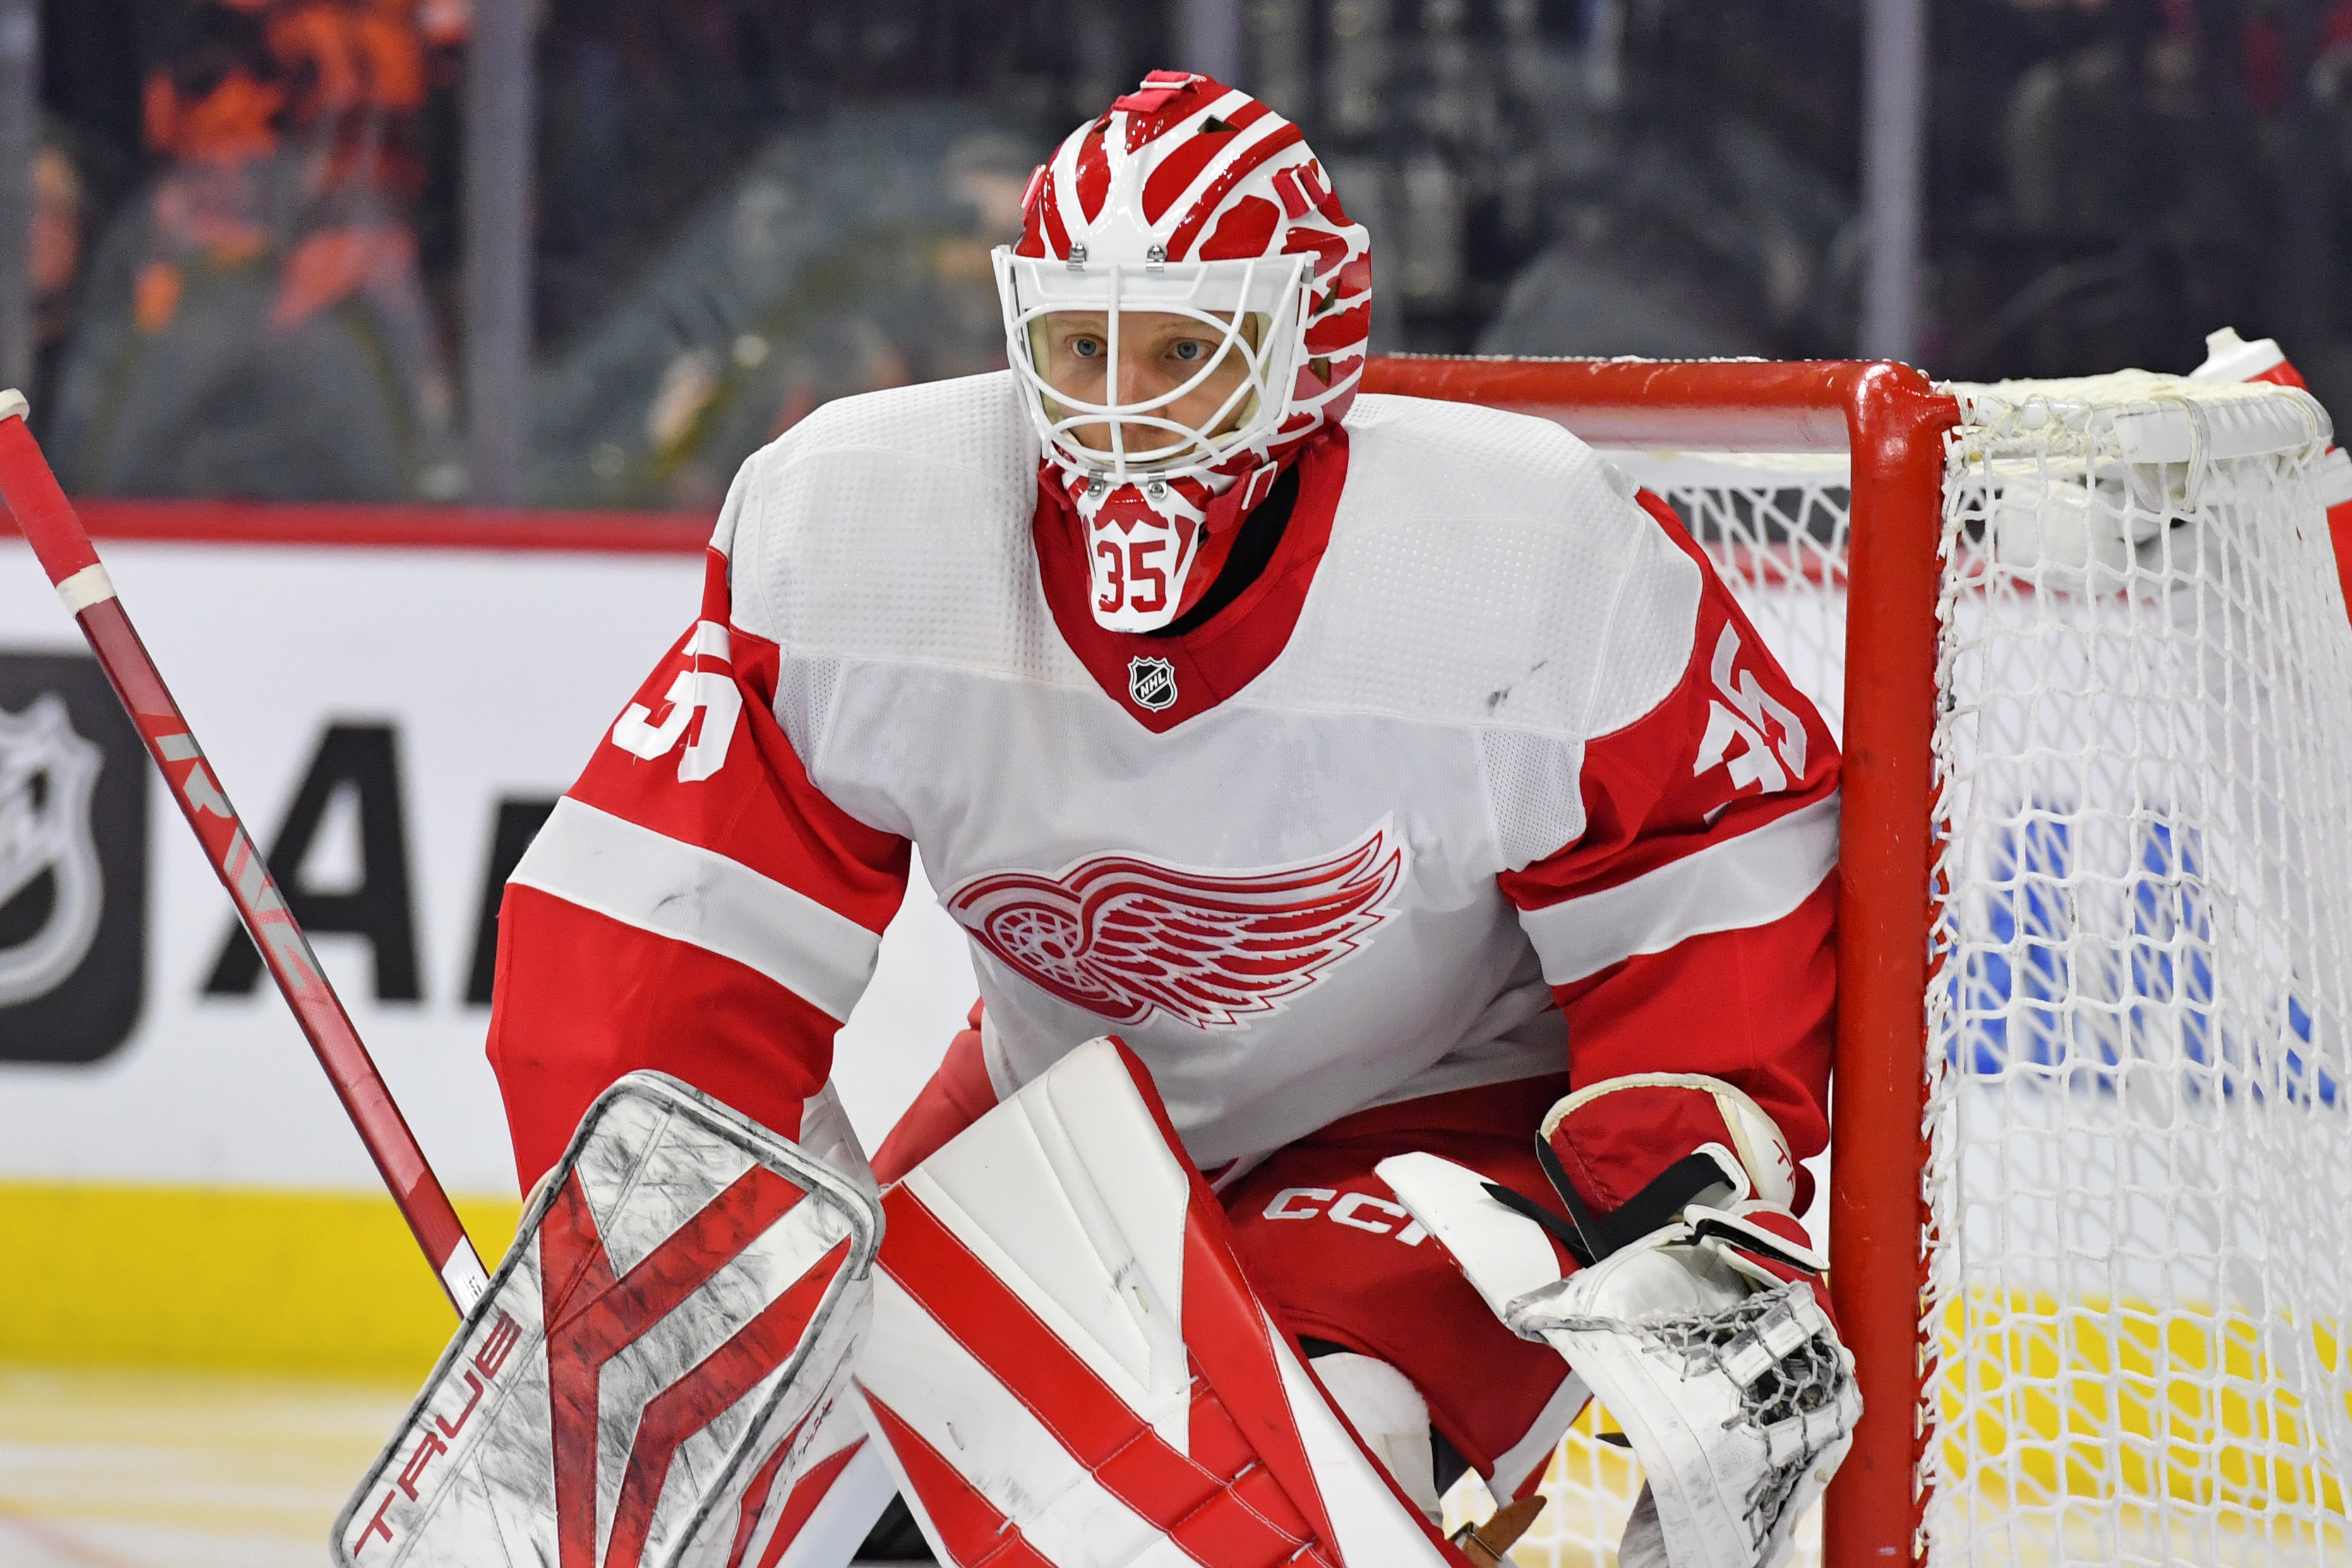 Ersson makes 33 saves, Flyers shut out Red Wings